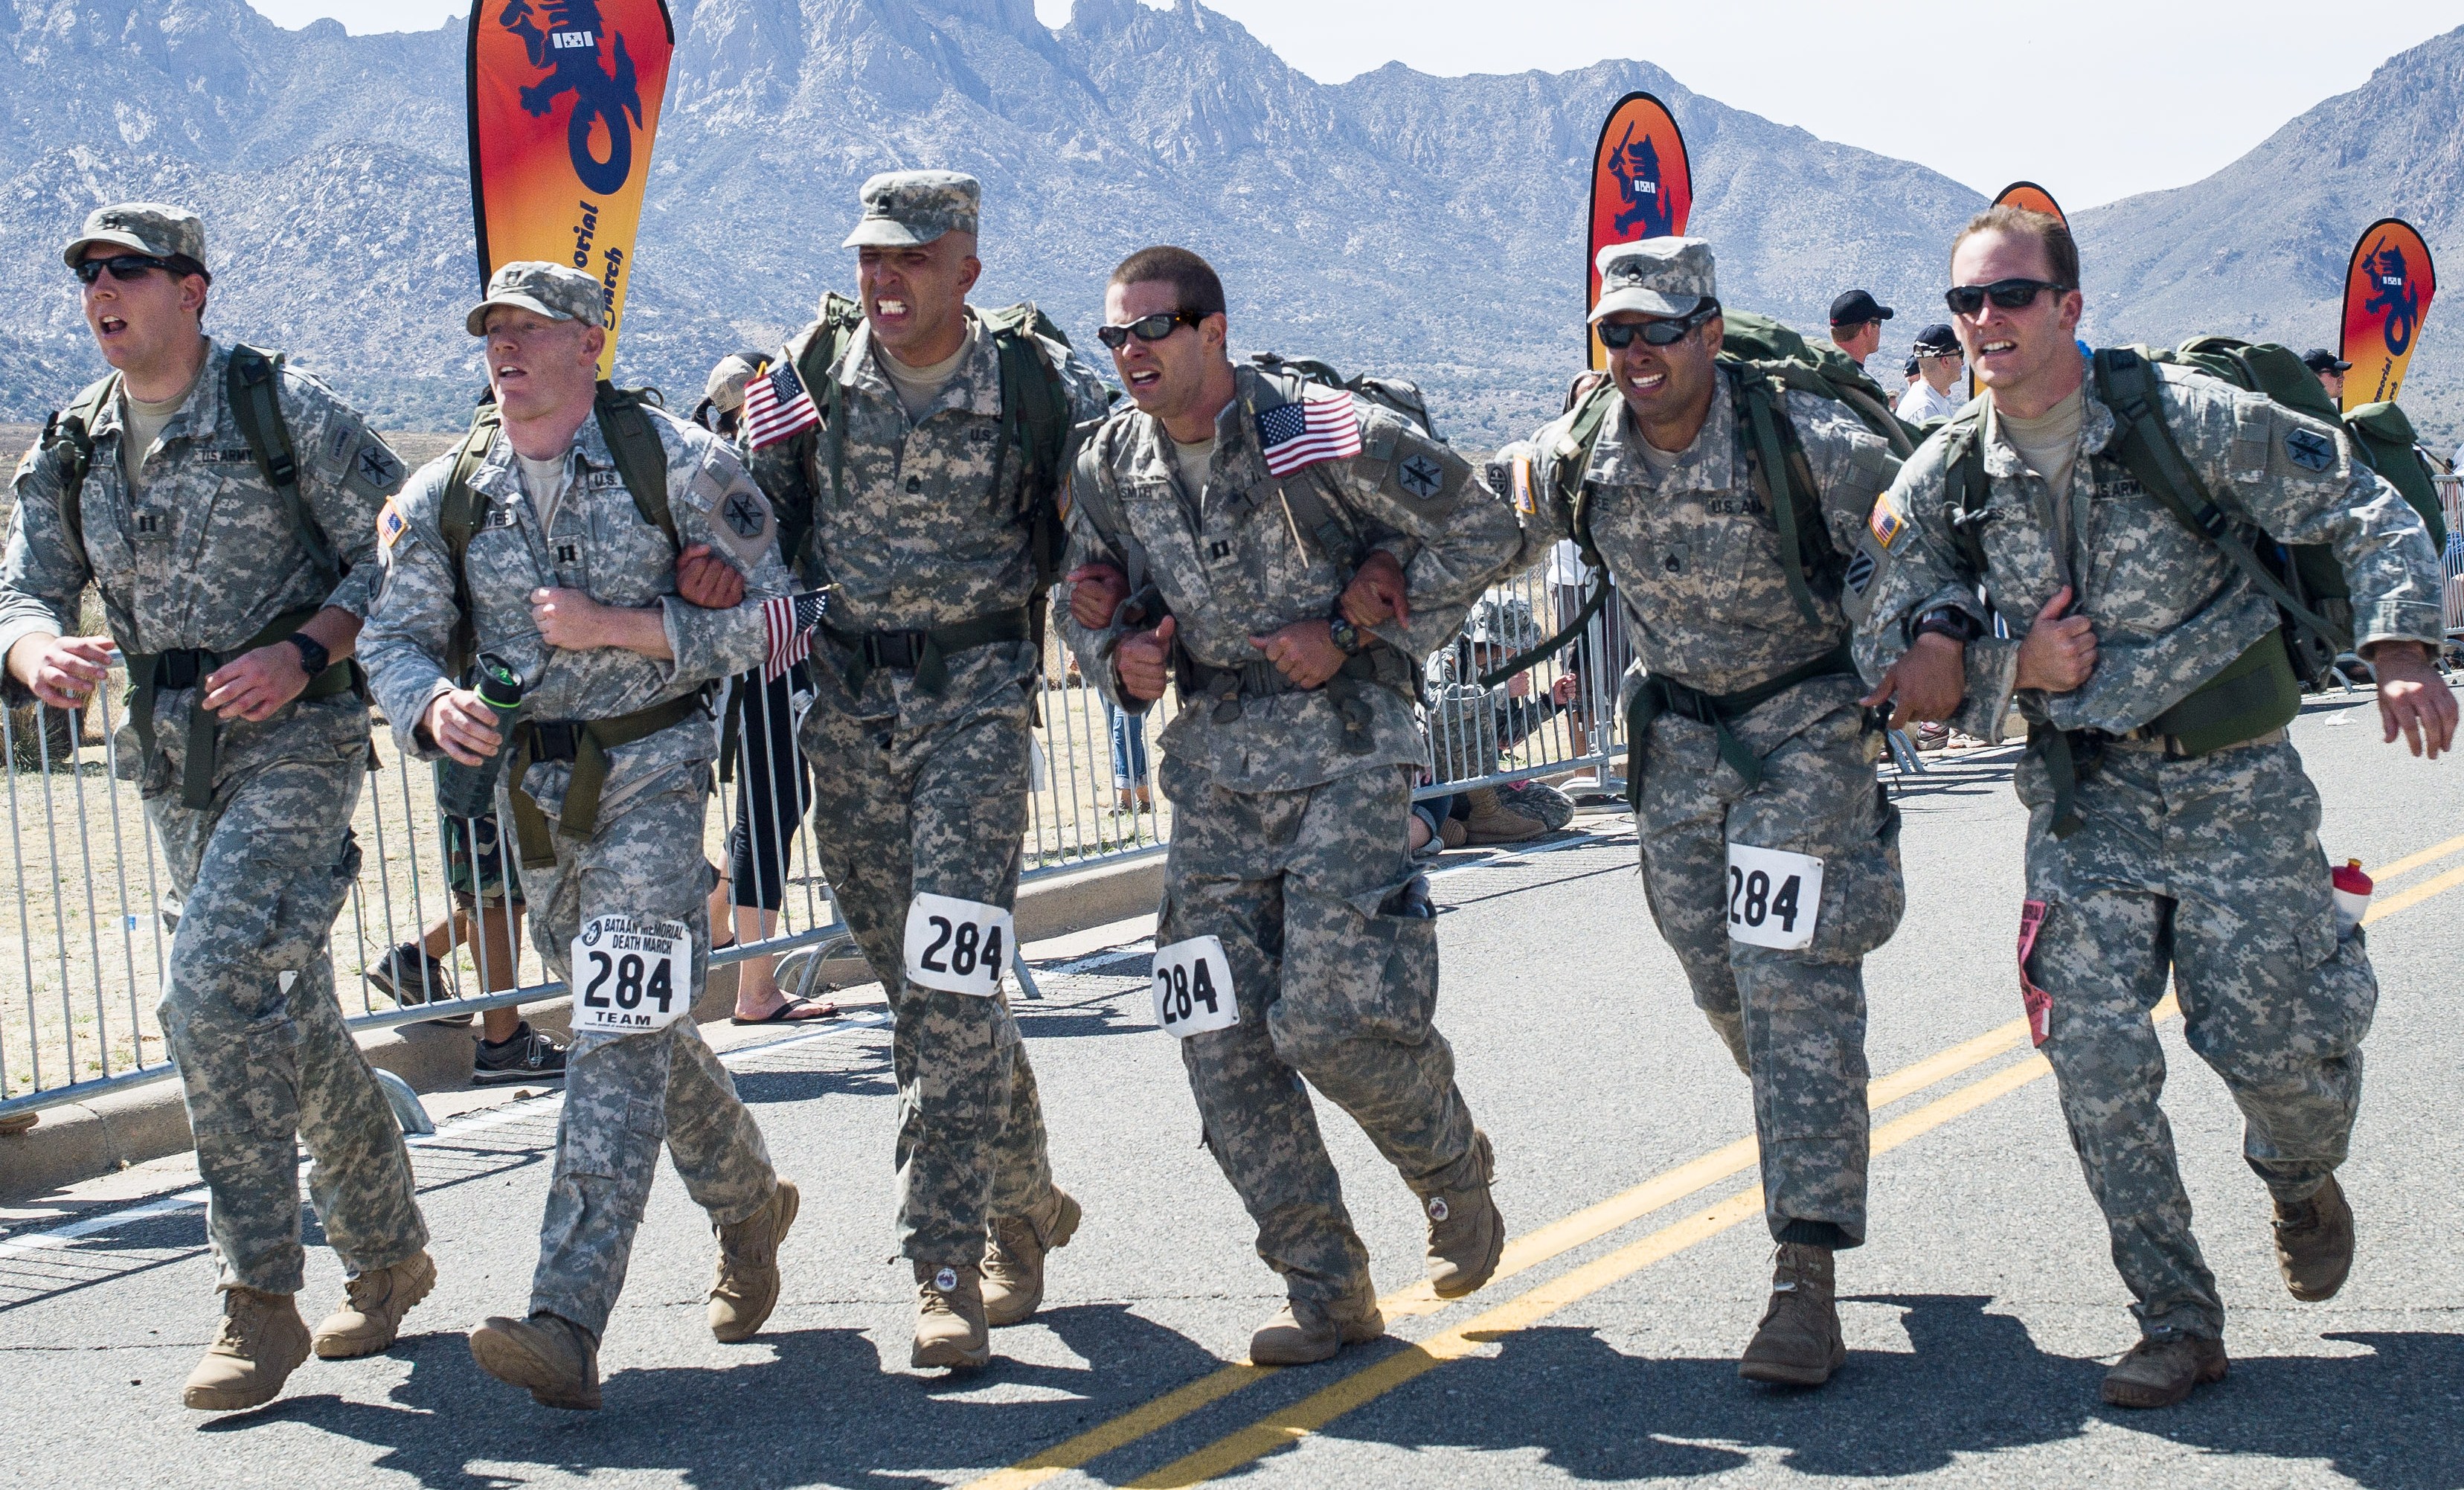 20120327-A-RE761-010: Members of the 81st Civil Affairs Battalion ‘Tribal Endurance’ Bataan Death March Team prepare to cross the finish line of the 23rd Annual Bataan Memorial Death March held March 25 at the White Sands Missile Range in New Mexico. The 26.2-mile march is held each year to commemorate the forcible transfer of more than 70,000 Filipino and American civilians and Soldiers over an 80-mile distance by the Imperial Japanese Army during WWII. This year’s event was the largest ever – with more than 7,000 participants. The team officially placed third overall in the military male heavy team division with each member carrying a rucksack weighing at least 35lbs. The team is also officially the highest placing male heavy division team based out of Fort Hood. From left to right, the team members are: Capt. Alex Perotti, Capt. Brian Garver, Sgt. 1st Class Gerardo Lora, Capt. Aaron K. Smith, Staff Sgt. Jose M. Ledee, and Capt. Michael Jones. (Photo by Staff Sgt. Michael J. Dator, 85th Civil Affairs Brigade Public Affairs) 